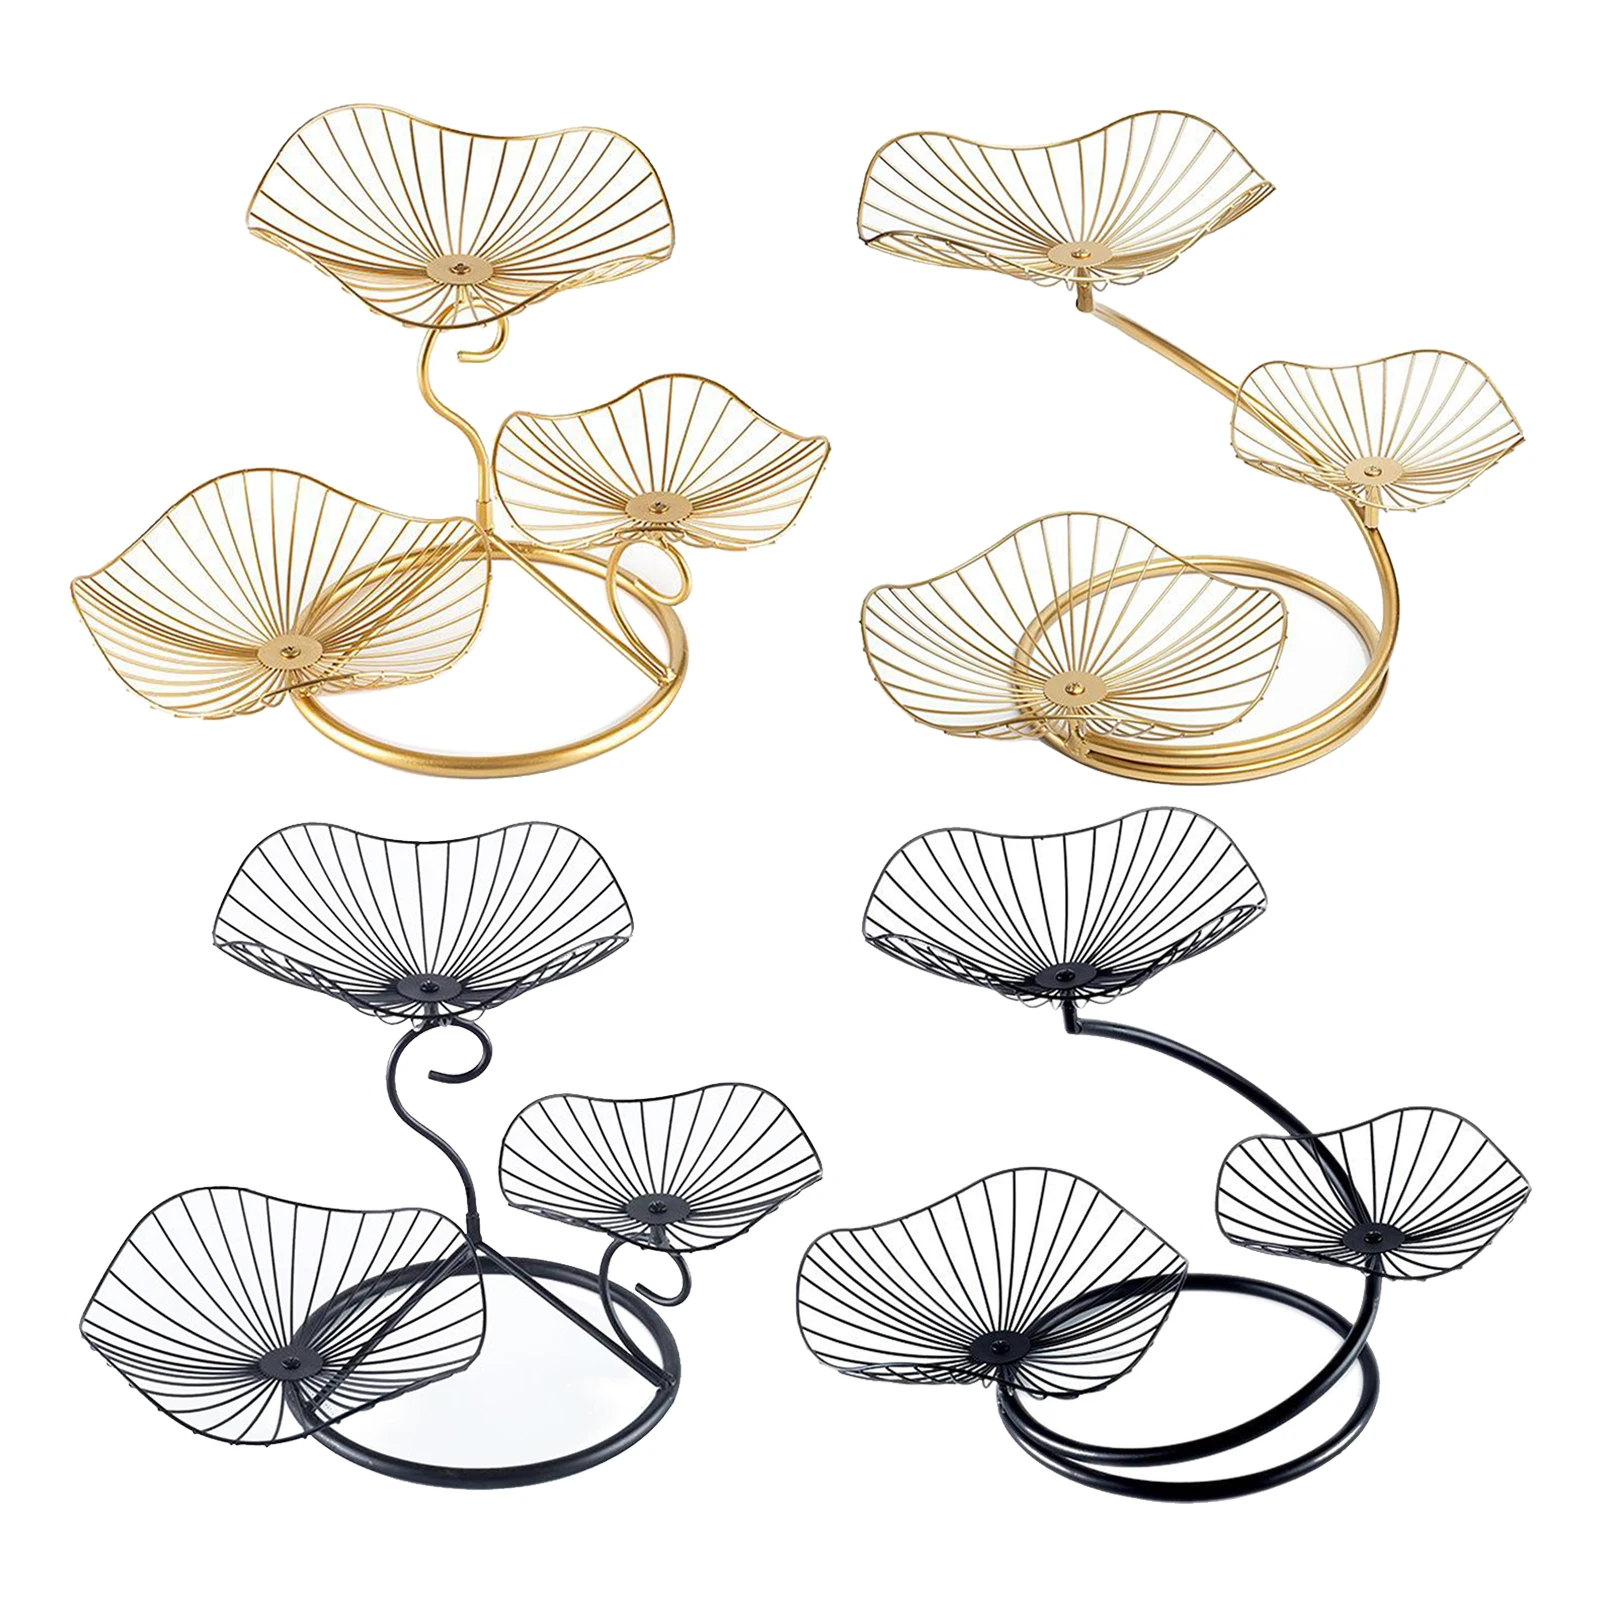 

Lotus Leaf Fruit Bowl Display Basket Iron Wire Fruit Drainer Holder Dish 3 Tier for Snacks Cookies Candies